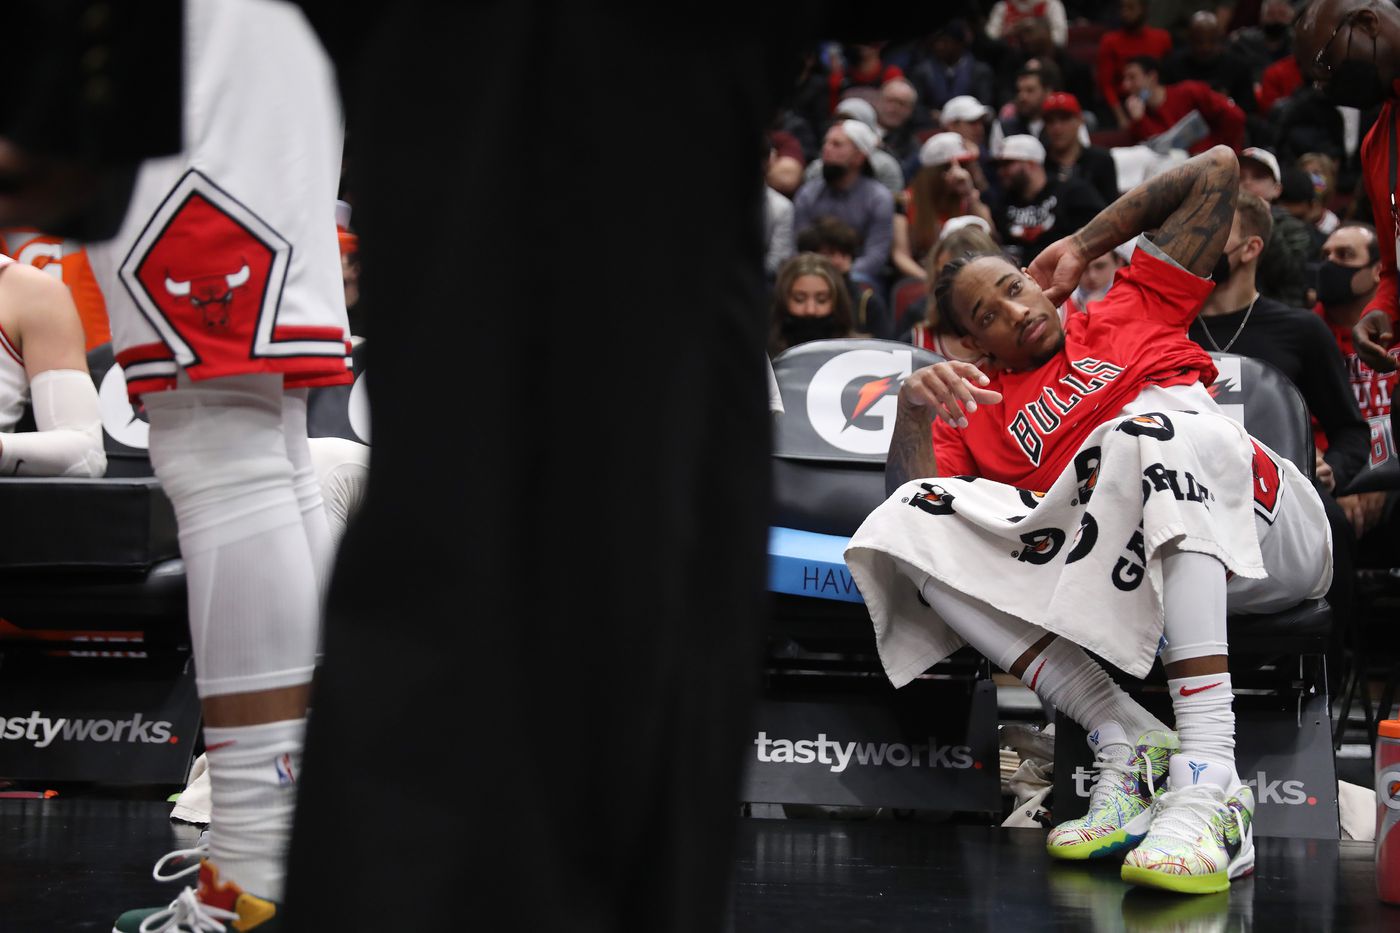 Chicago Bulls guard Ayo Dosunmu (12) rests on the bench during a timeout in the fourth quarter against the Washington Wizards at United Center on Jan. 7, 2022, in Chicago.